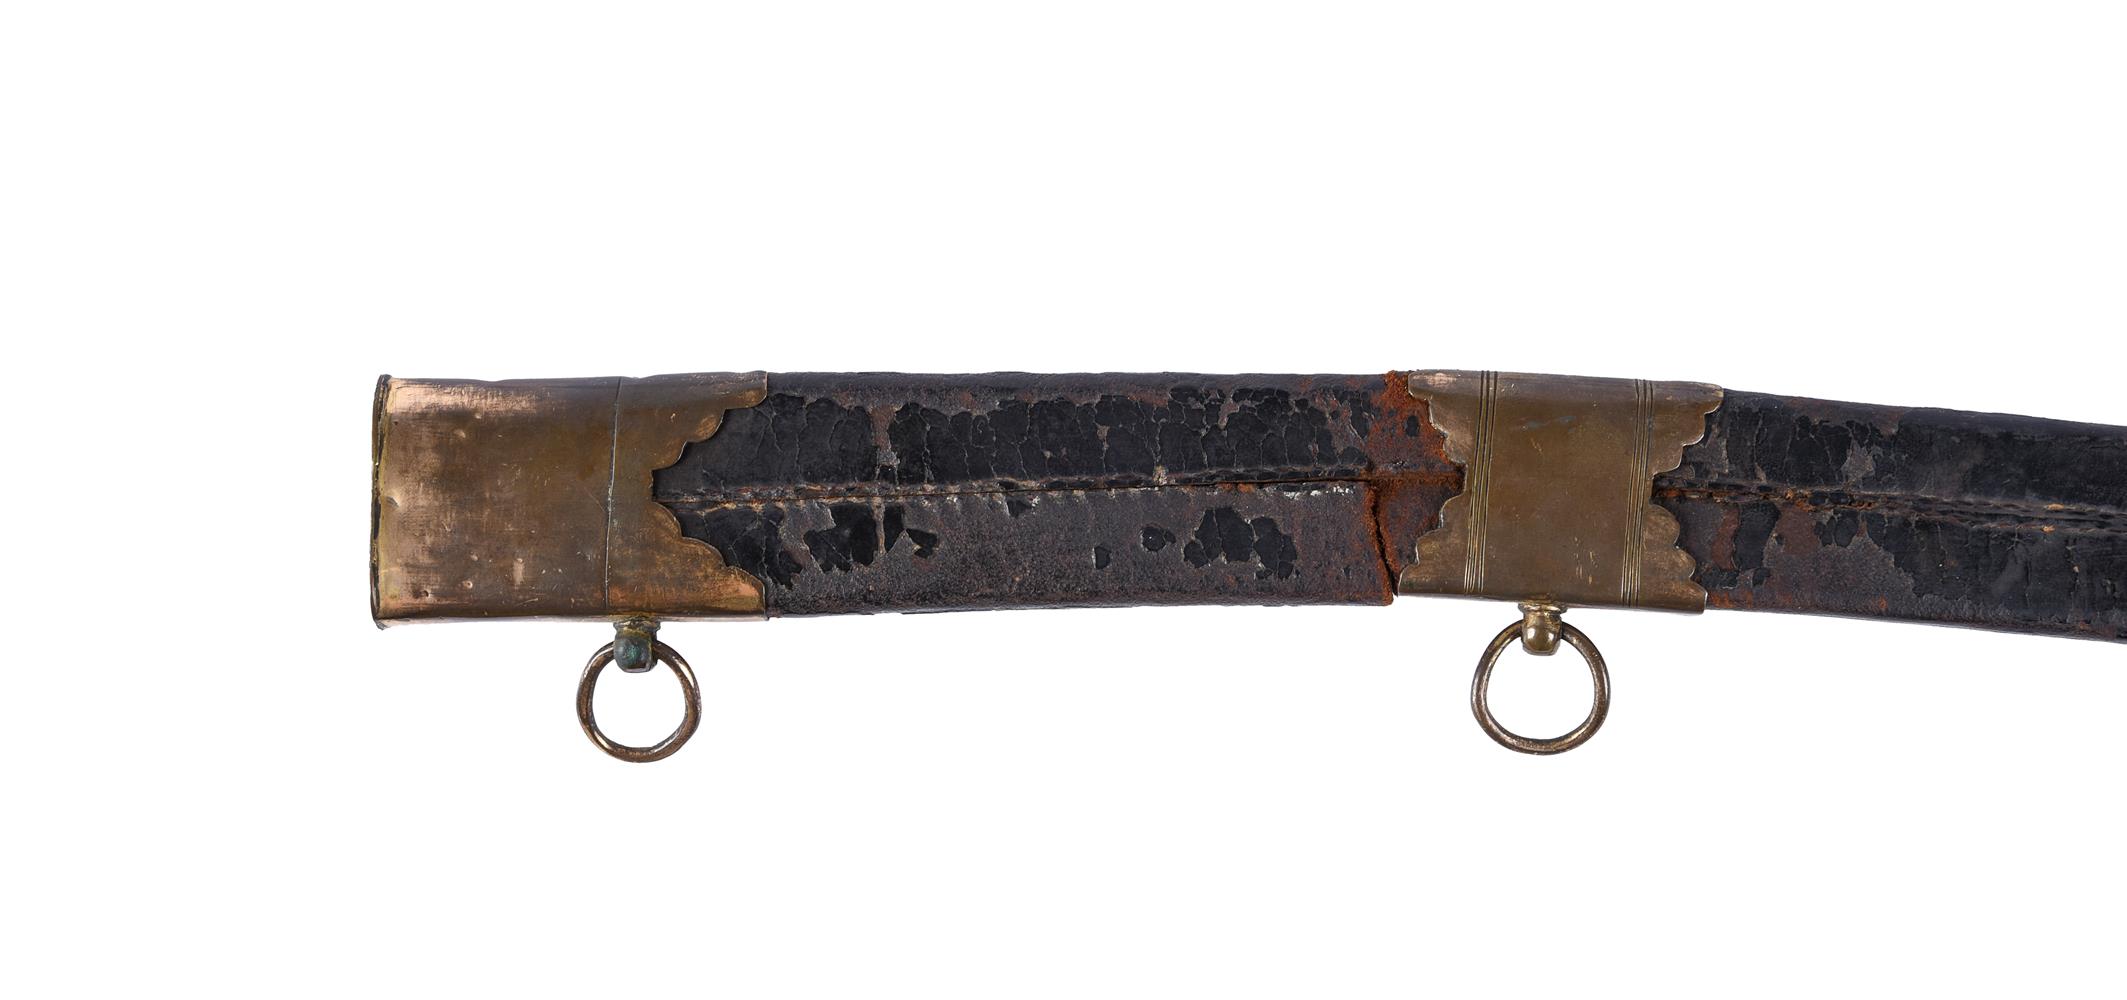 AN ENGRAVED COMMEMORATIVE NAVAL SIDEARM OR CUTLASS FOR THE BATTLE OF TRAFALGAR - Image 8 of 8